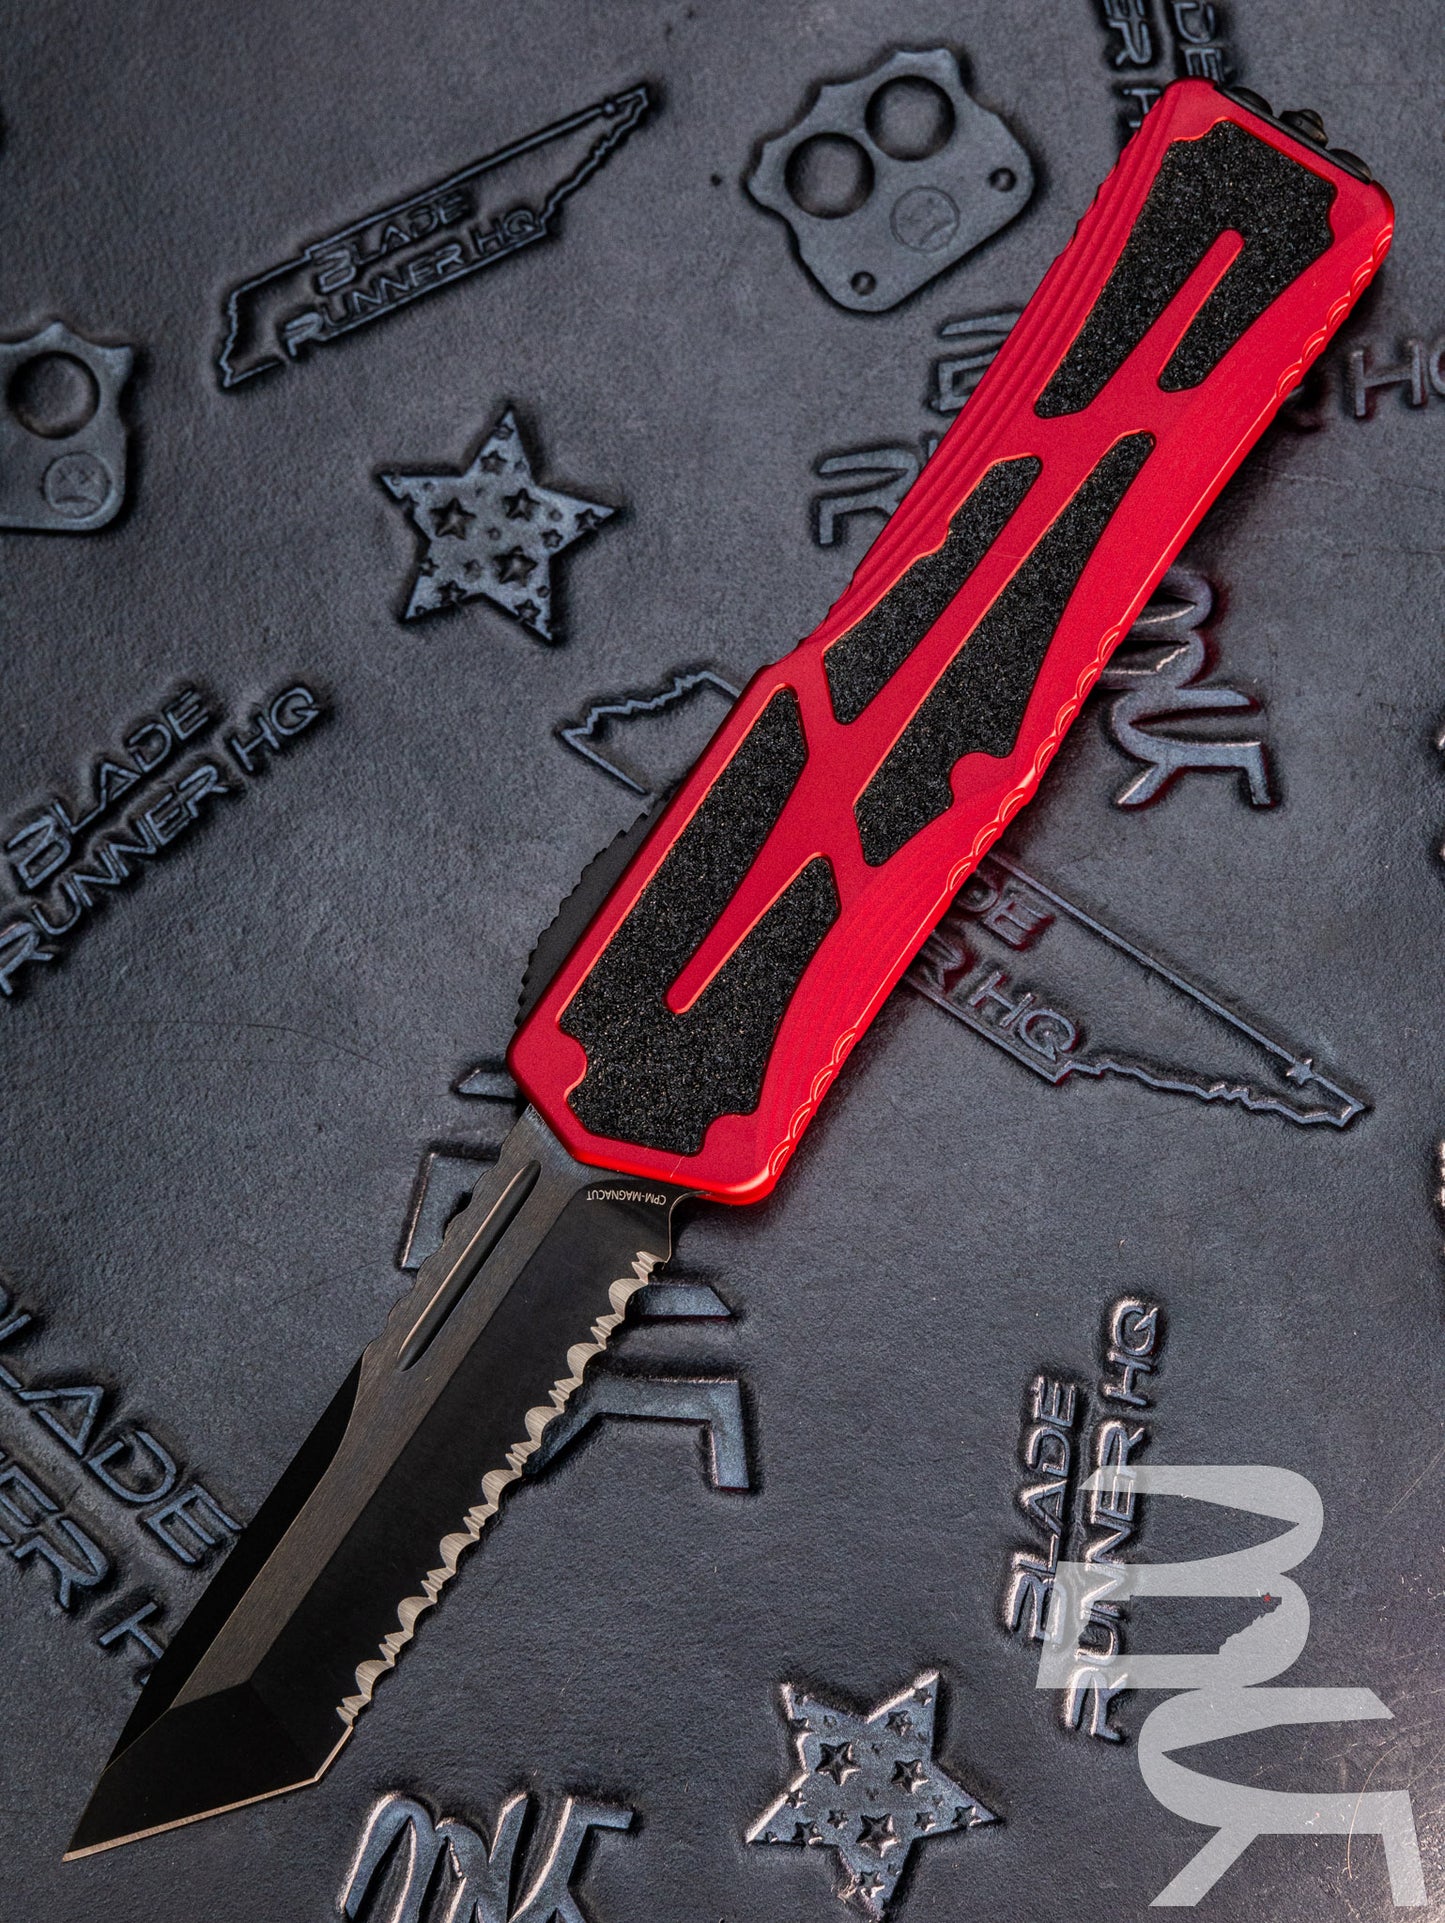 Heretic Knives Colossus DLC T/E, RED Handle, Black Clip & Hardware H040-6C- RED TANTO Full Serrated